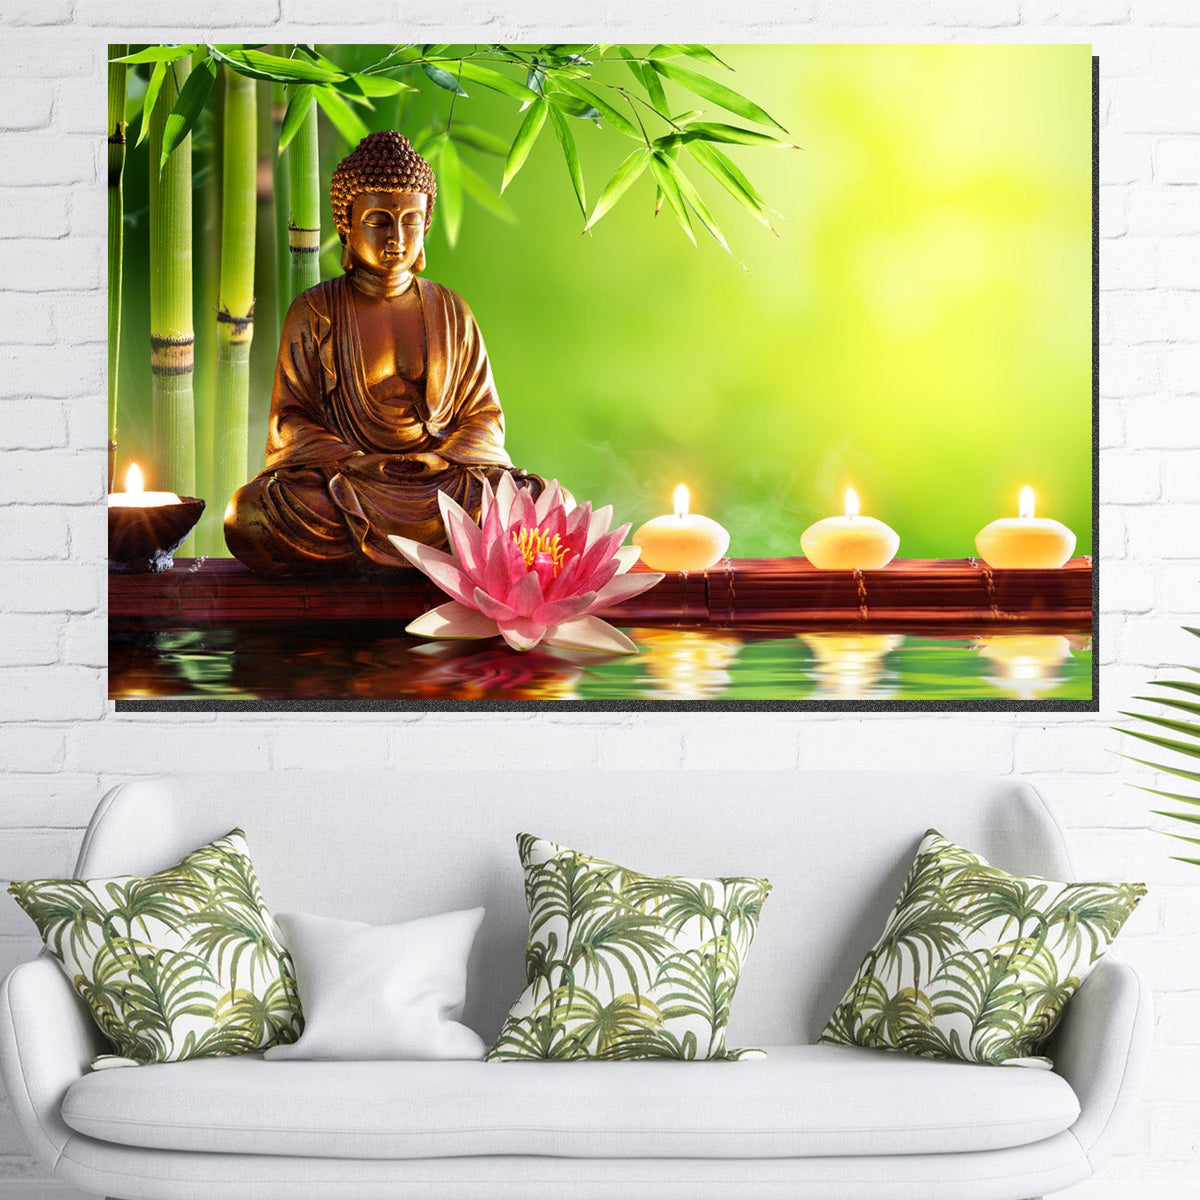 https://cdn.shopify.com/s/files/1/0387/9986/8044/products/BuddhawithcandlesCanvasArtprintStretched-1.jpg